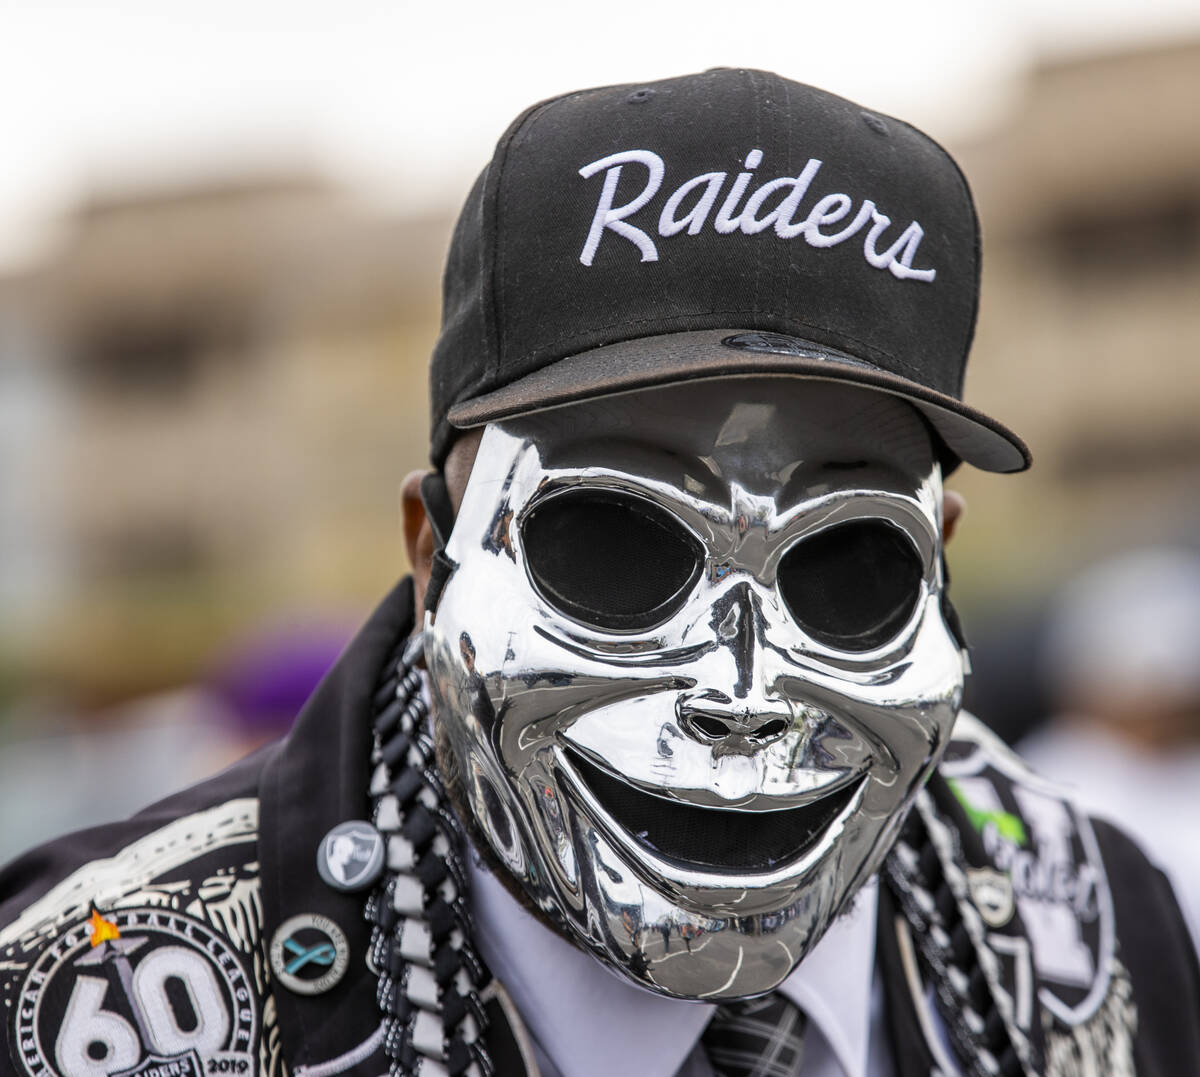 Philly invades Las Vegas for Raiders-Eagles game — PHOTOS